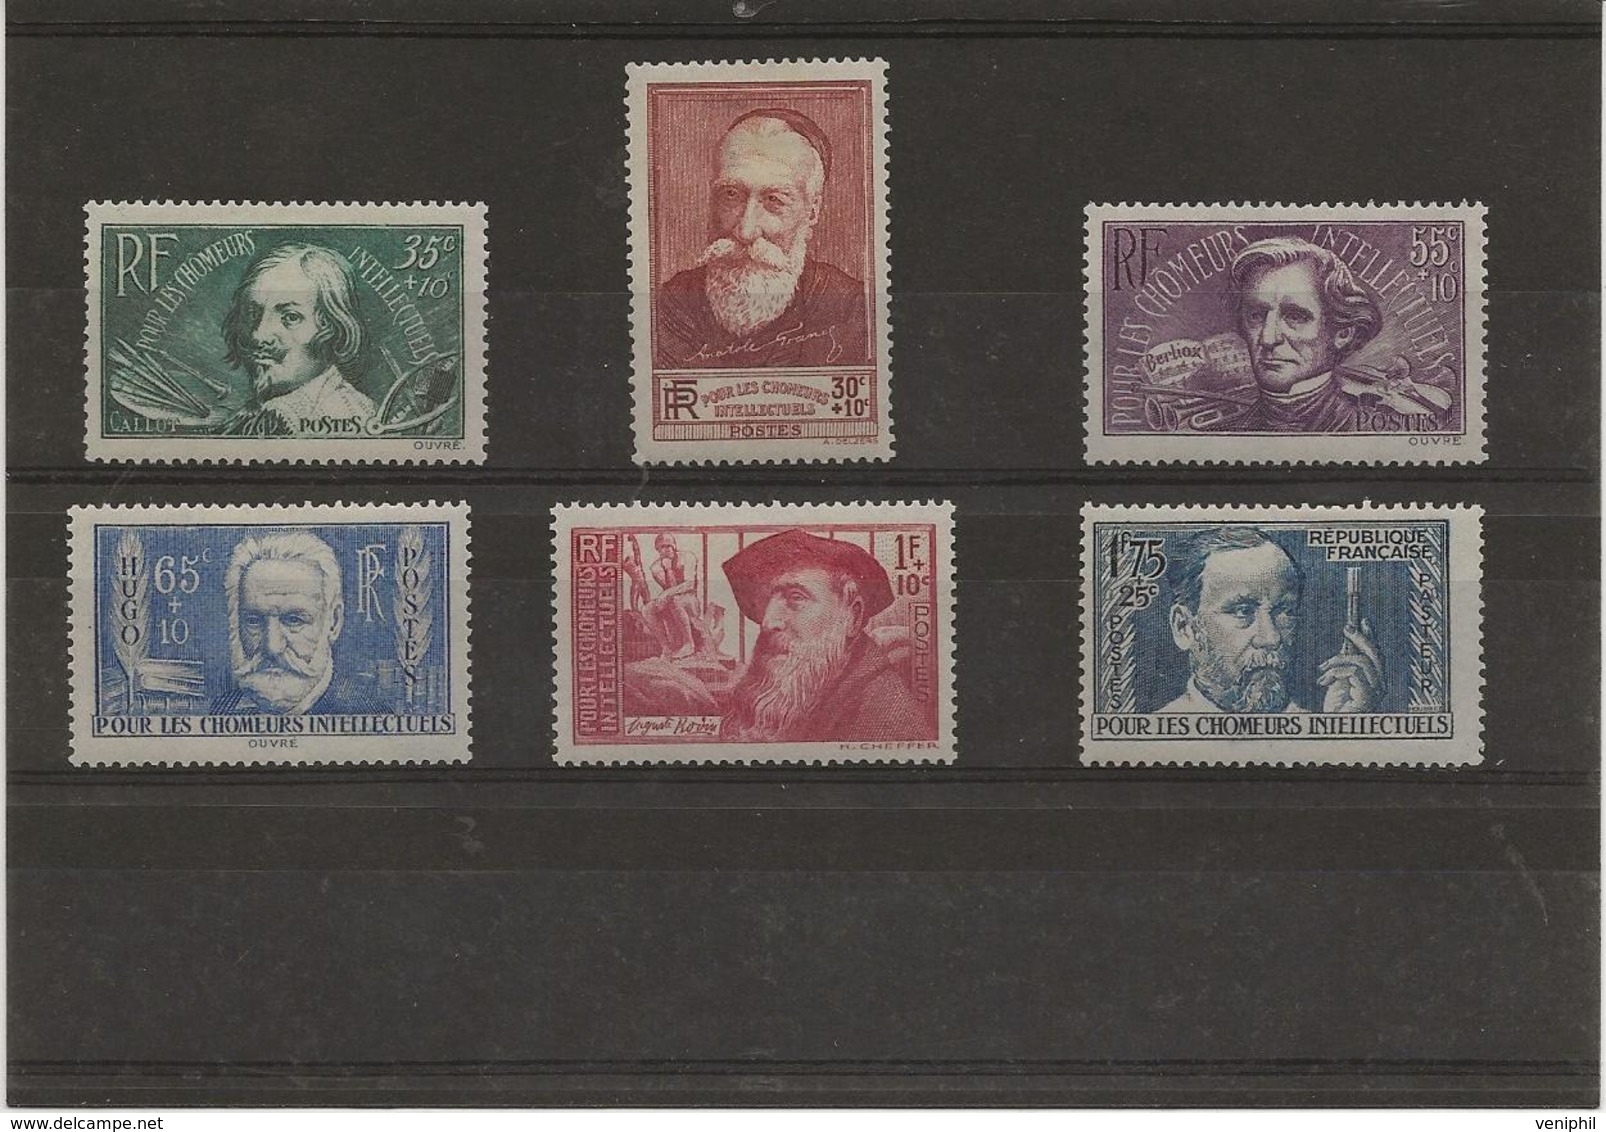 TIMBRES CHOMEURS INTELLECTUELS - N° 380 A 385 NEUF INFIME CHARNIERE - COTE : 45 € - Neufs